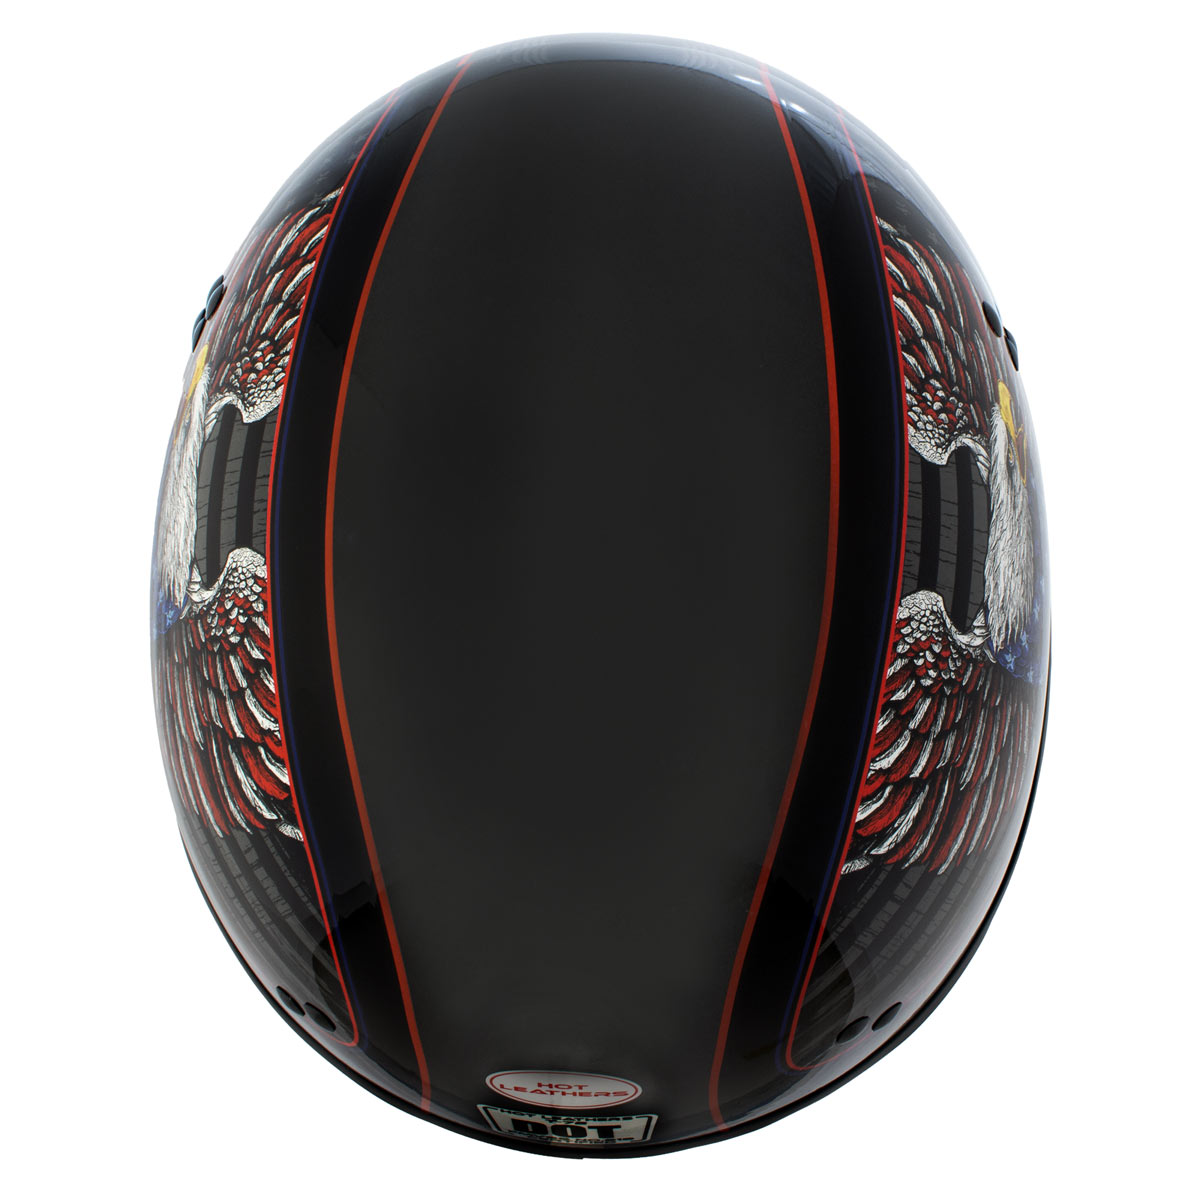 Hot Leathers HLD1037 Gloss Black 'Up Wing Eagle USA' Advanced DOT Helmet with Drop Down Tinted Visor